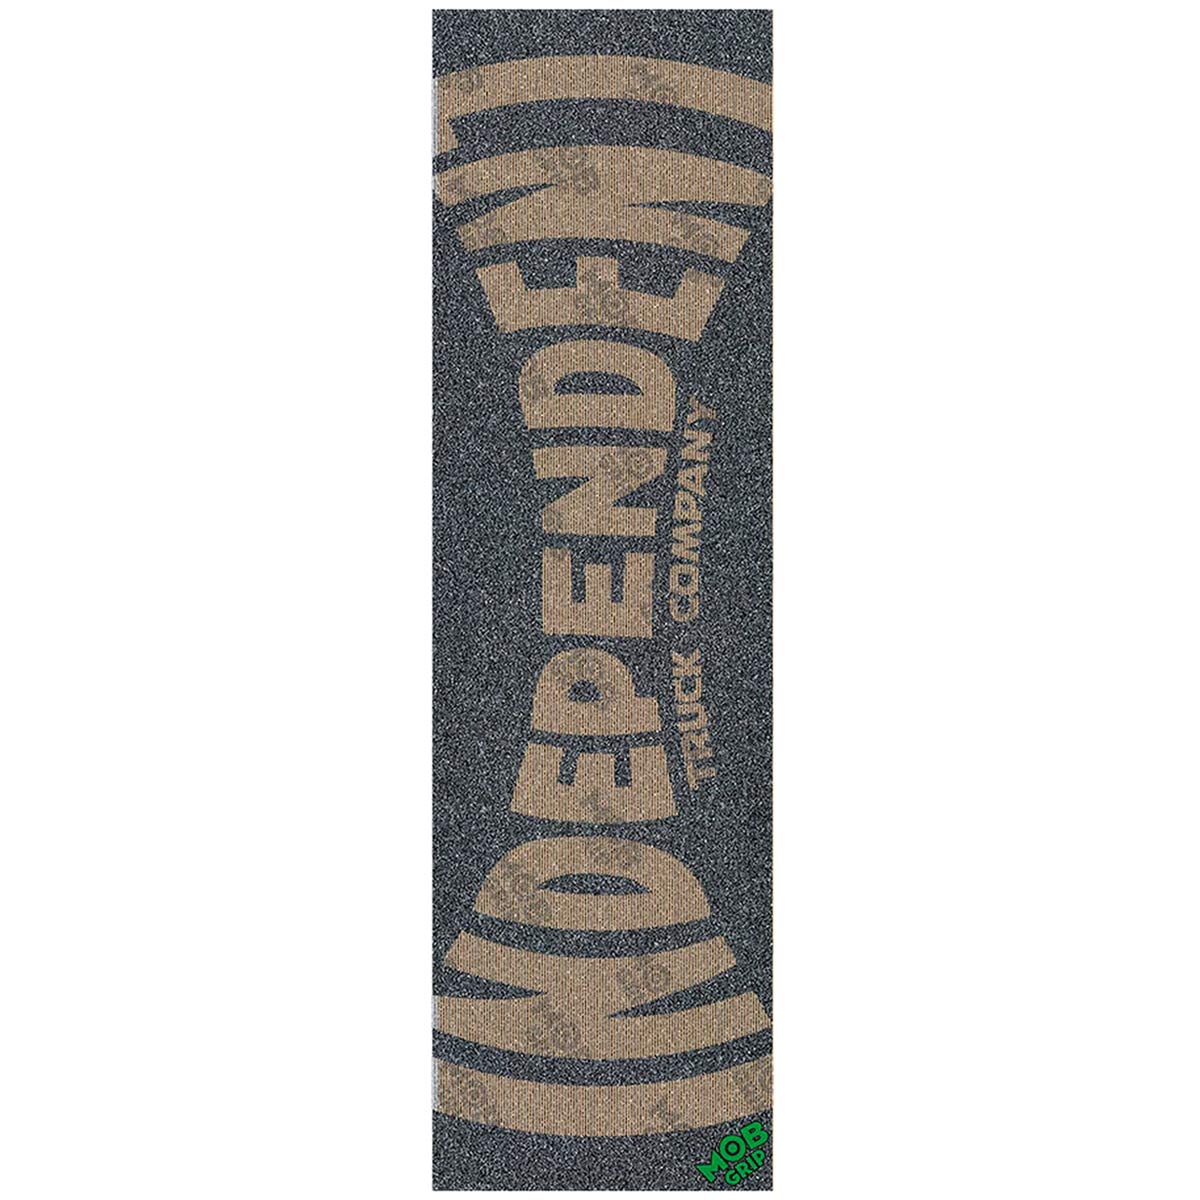 MOB X INDEPENDENT SPAN GRIPTAPE 9″ X 33″ BLACK/CLEAR